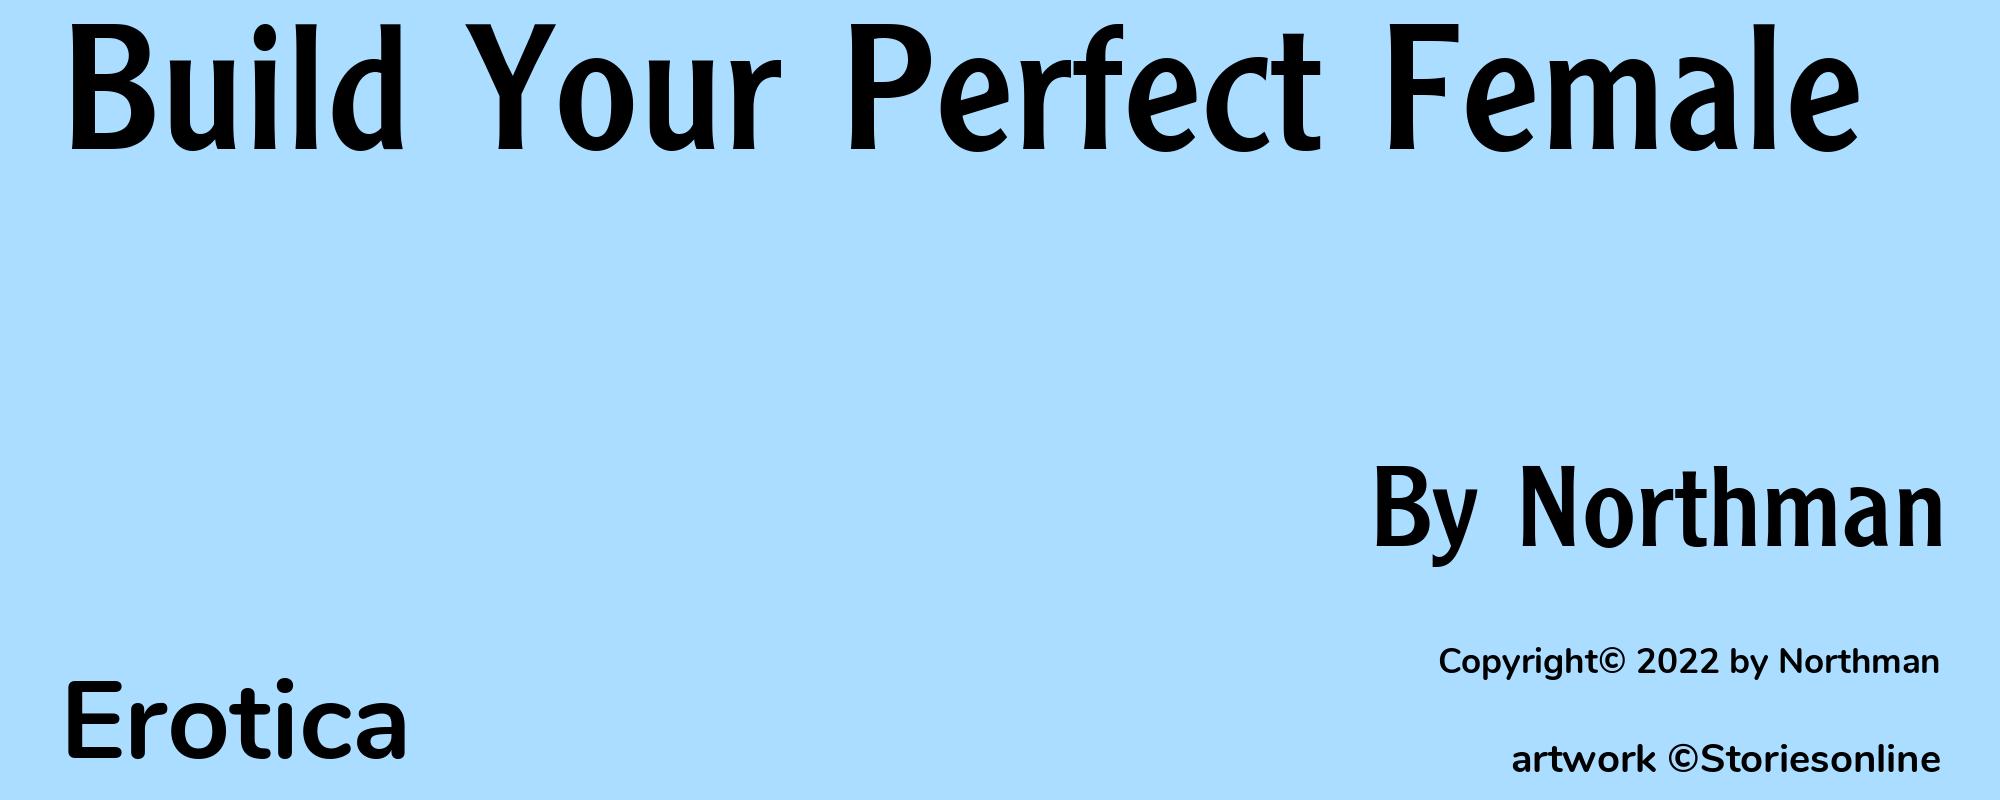 Build Your Perfect Female - Cover